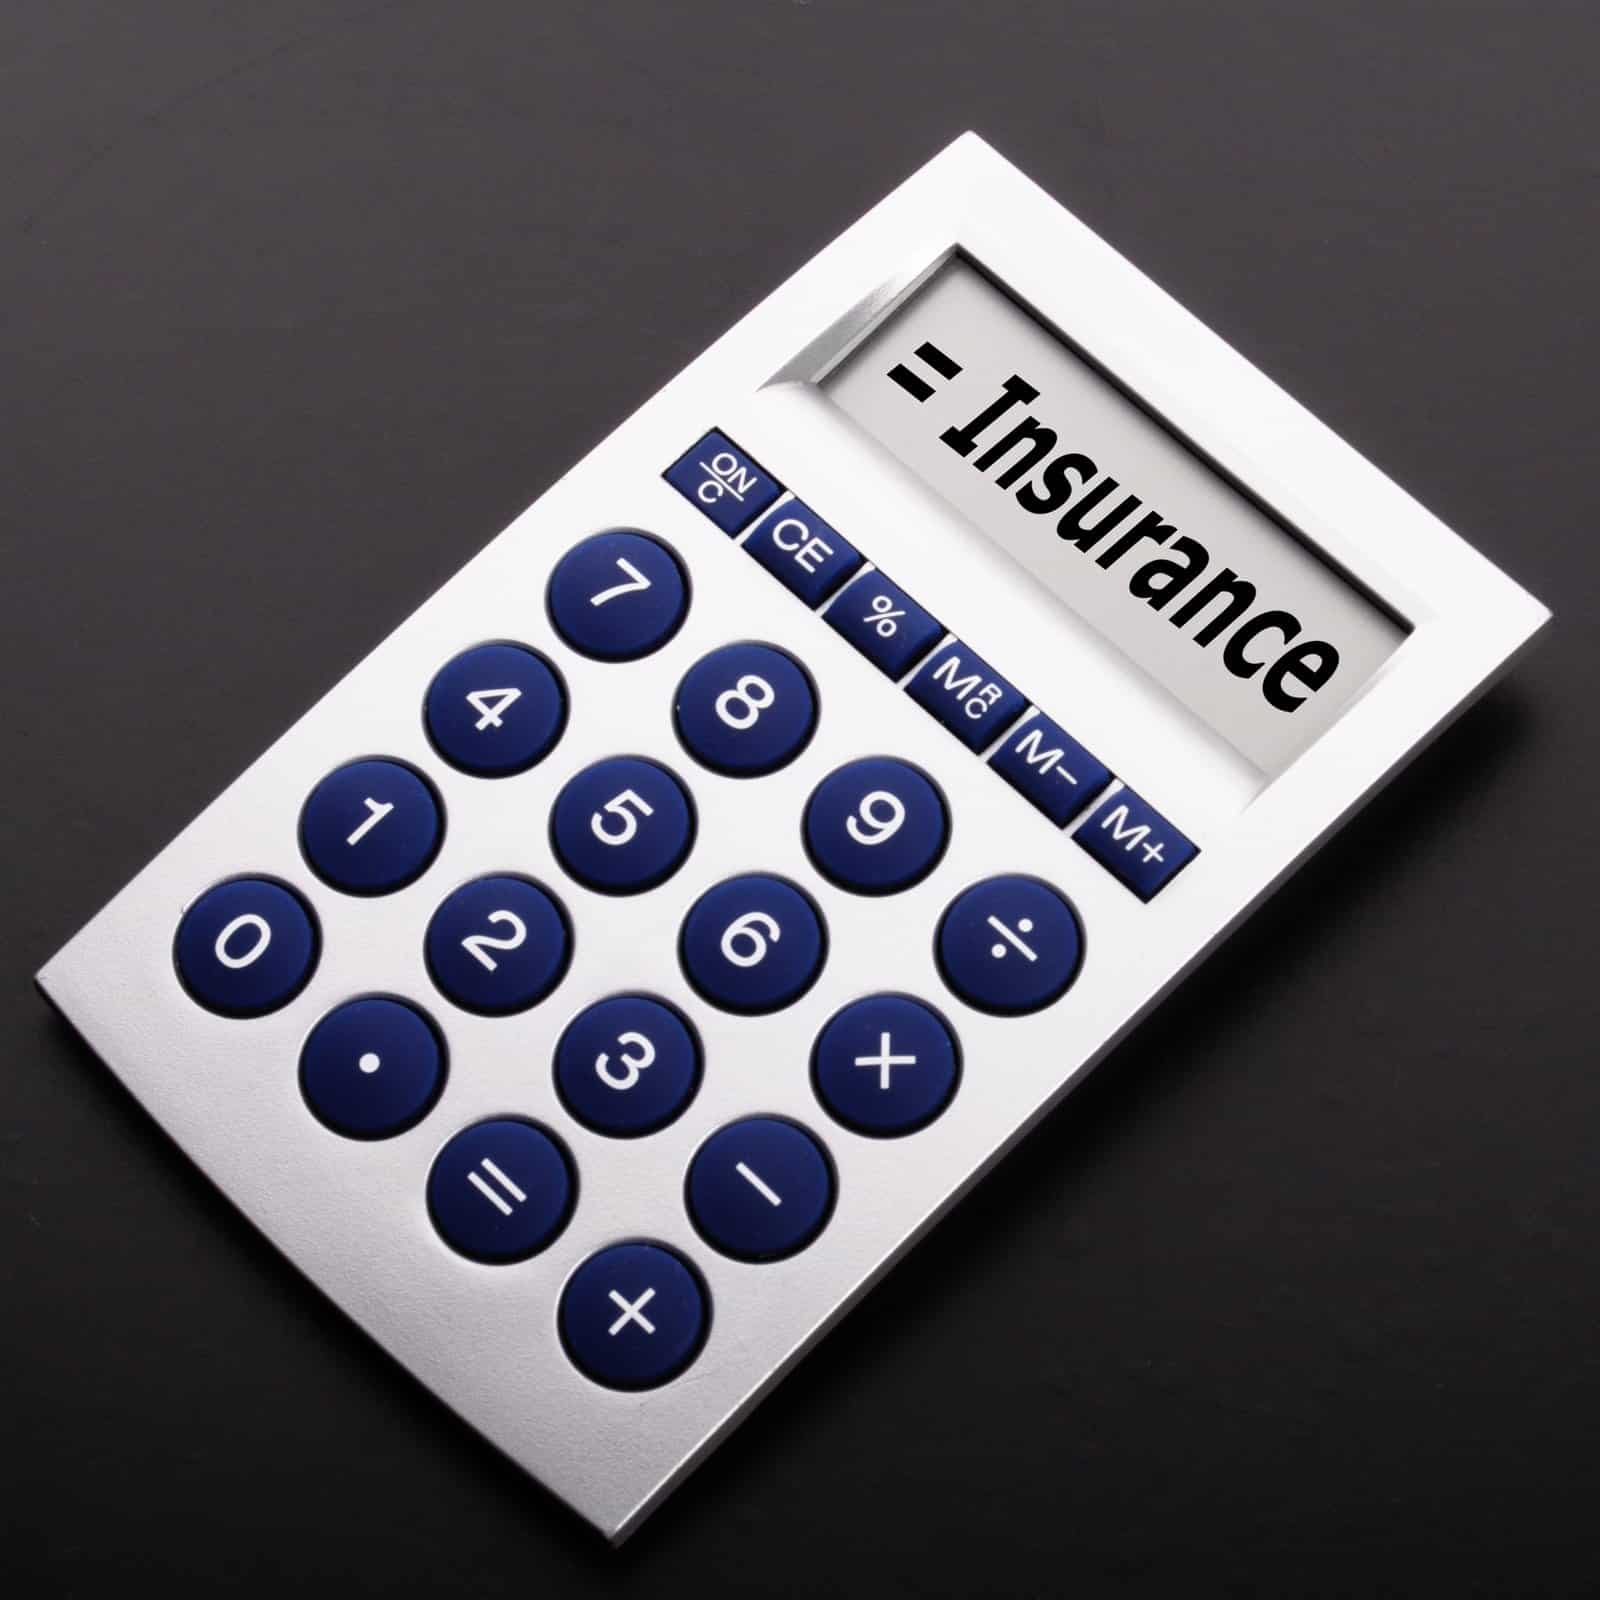 Calculating when you can self-insure